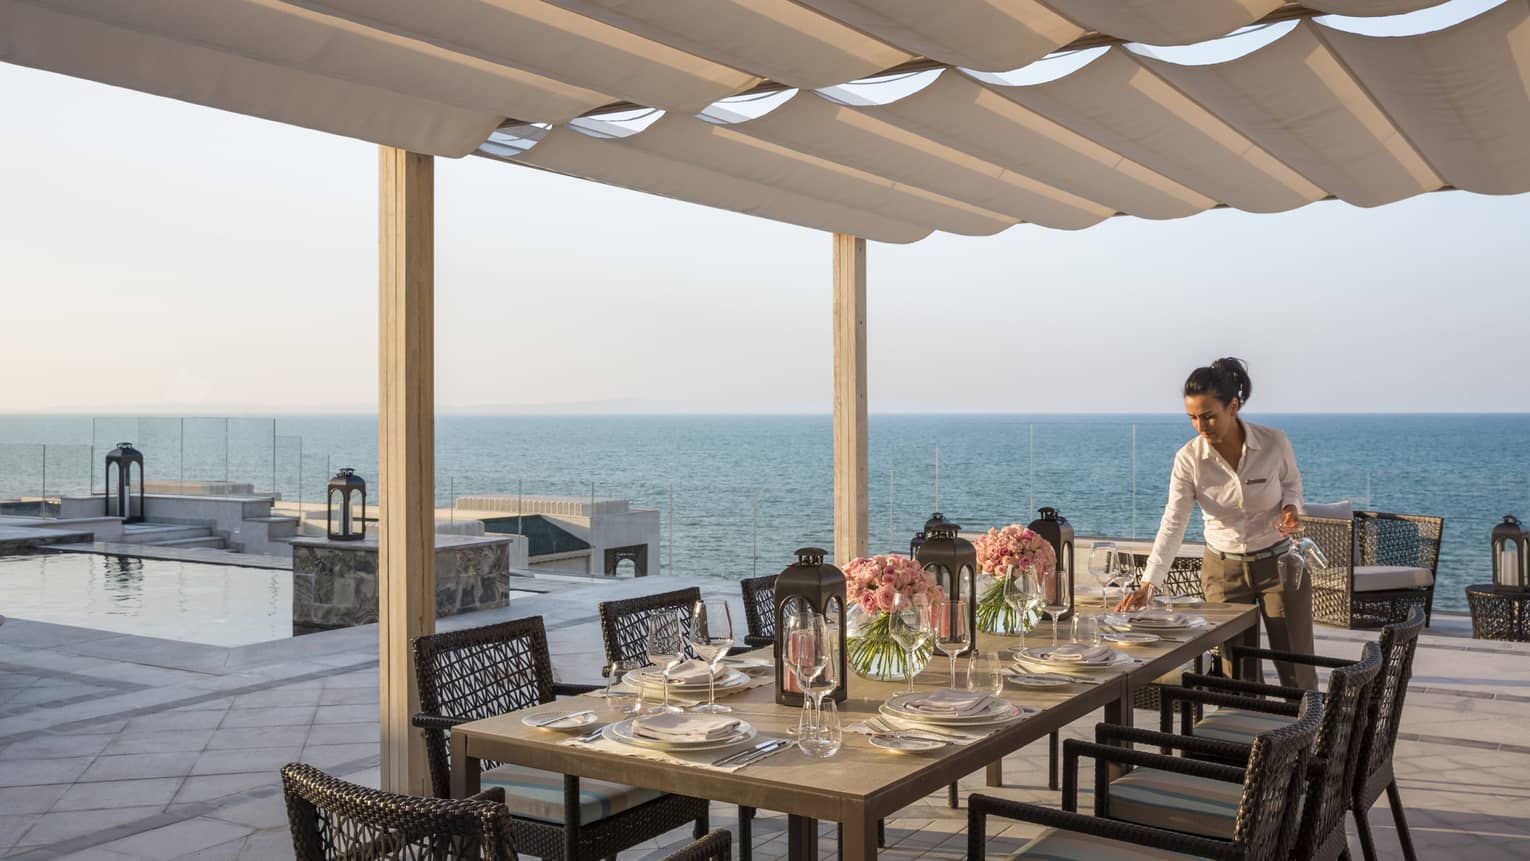 Woman sets table with flowers and lanterns on private rooftop patio overlooking pool and ocean views